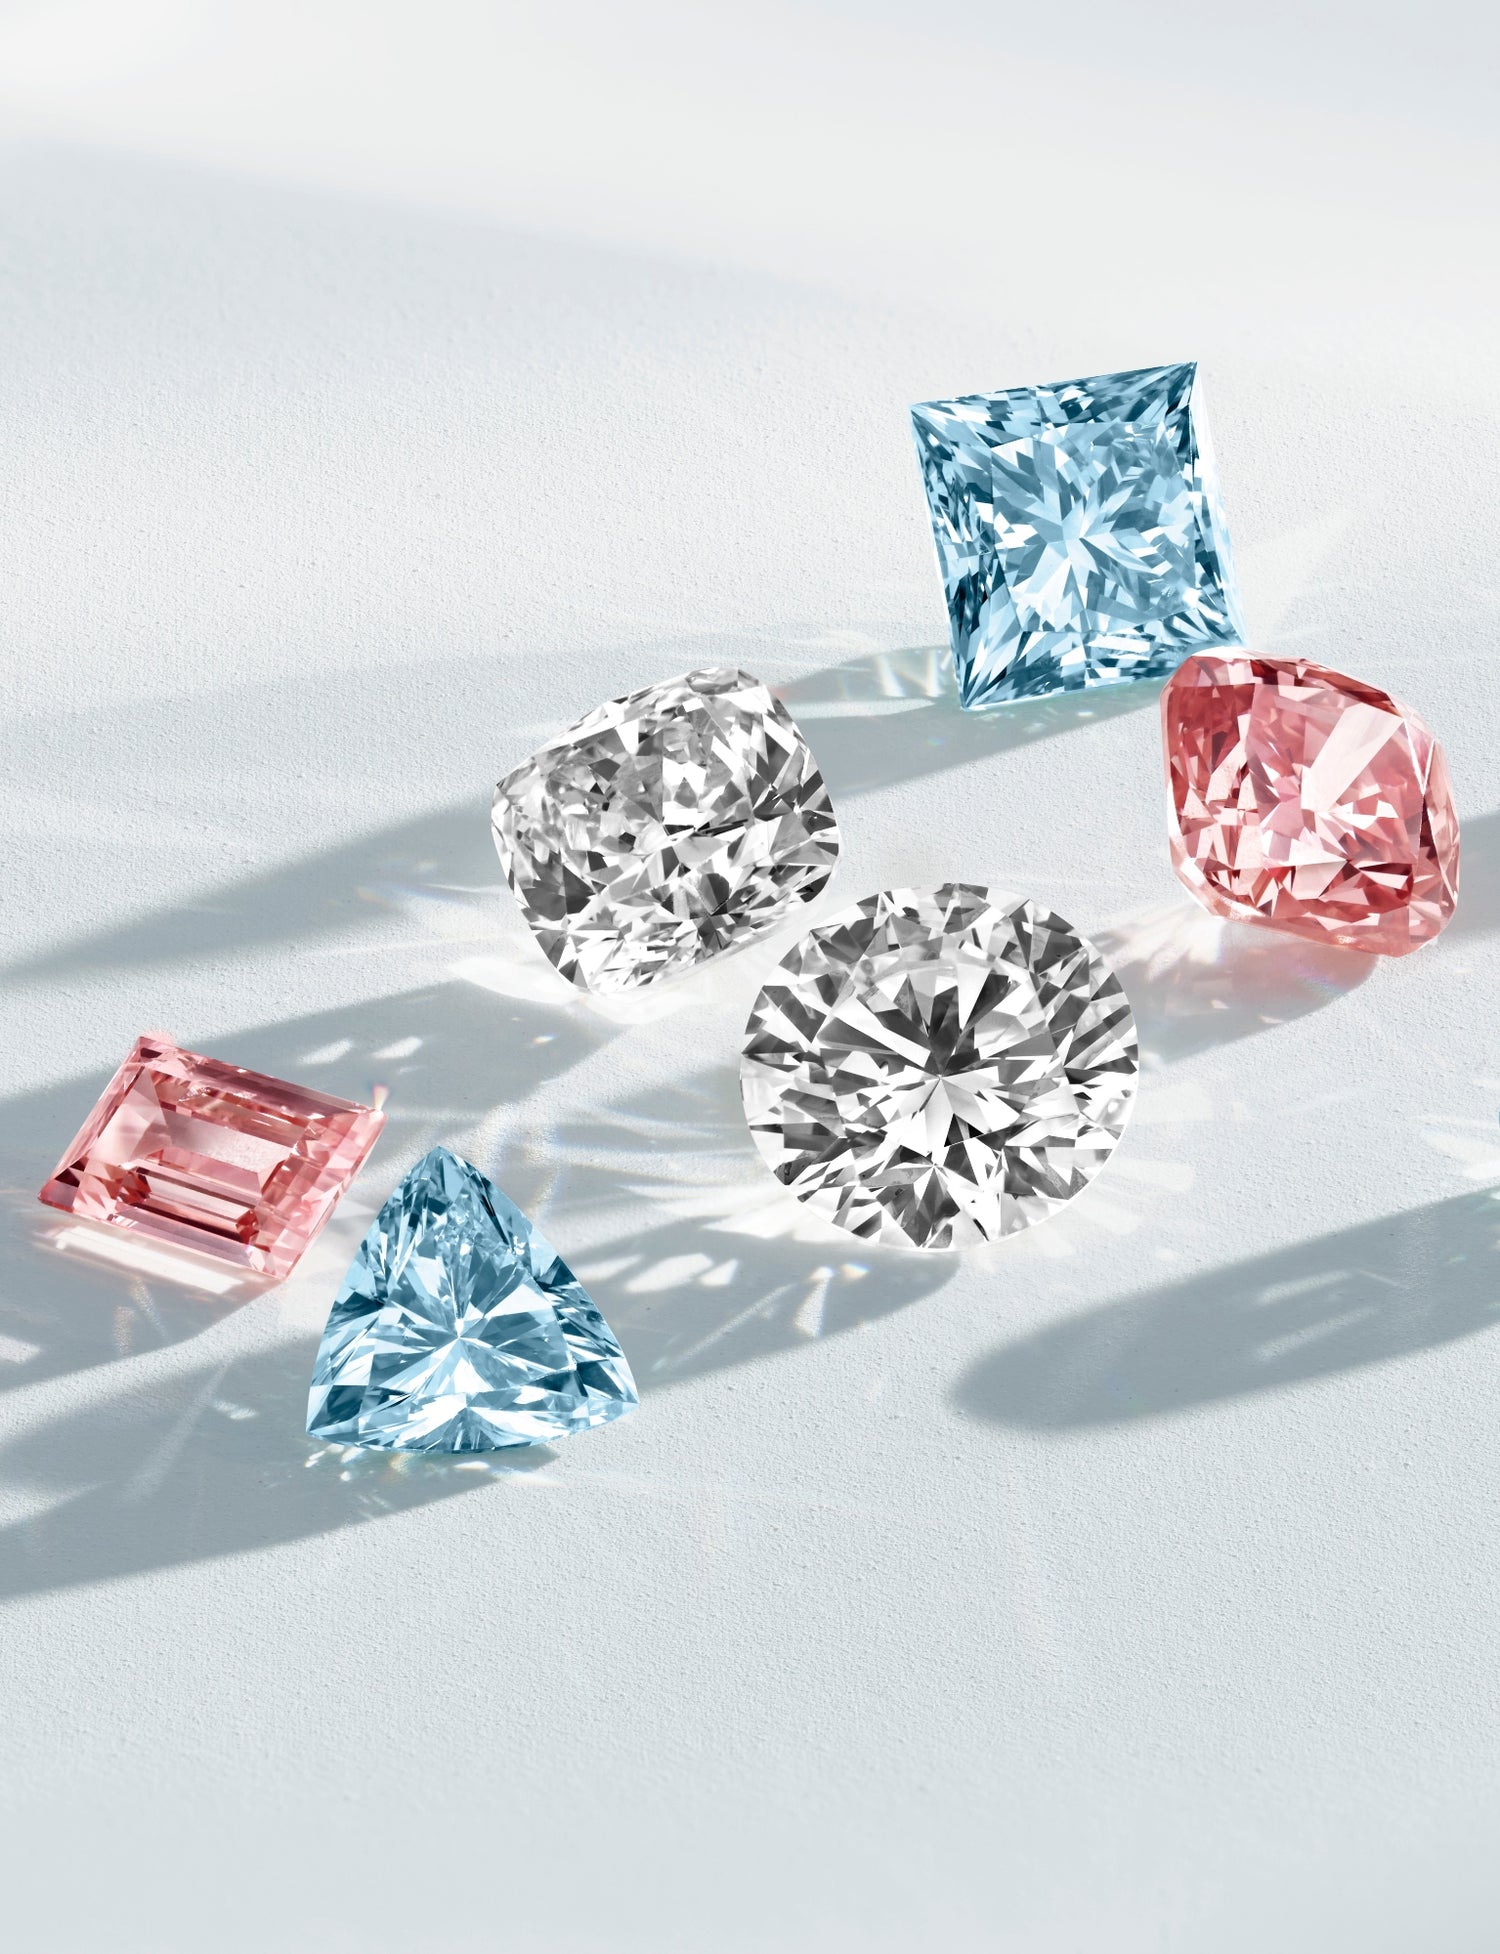 Lab-grown diamond pink, blue and white loose stones in various cuts